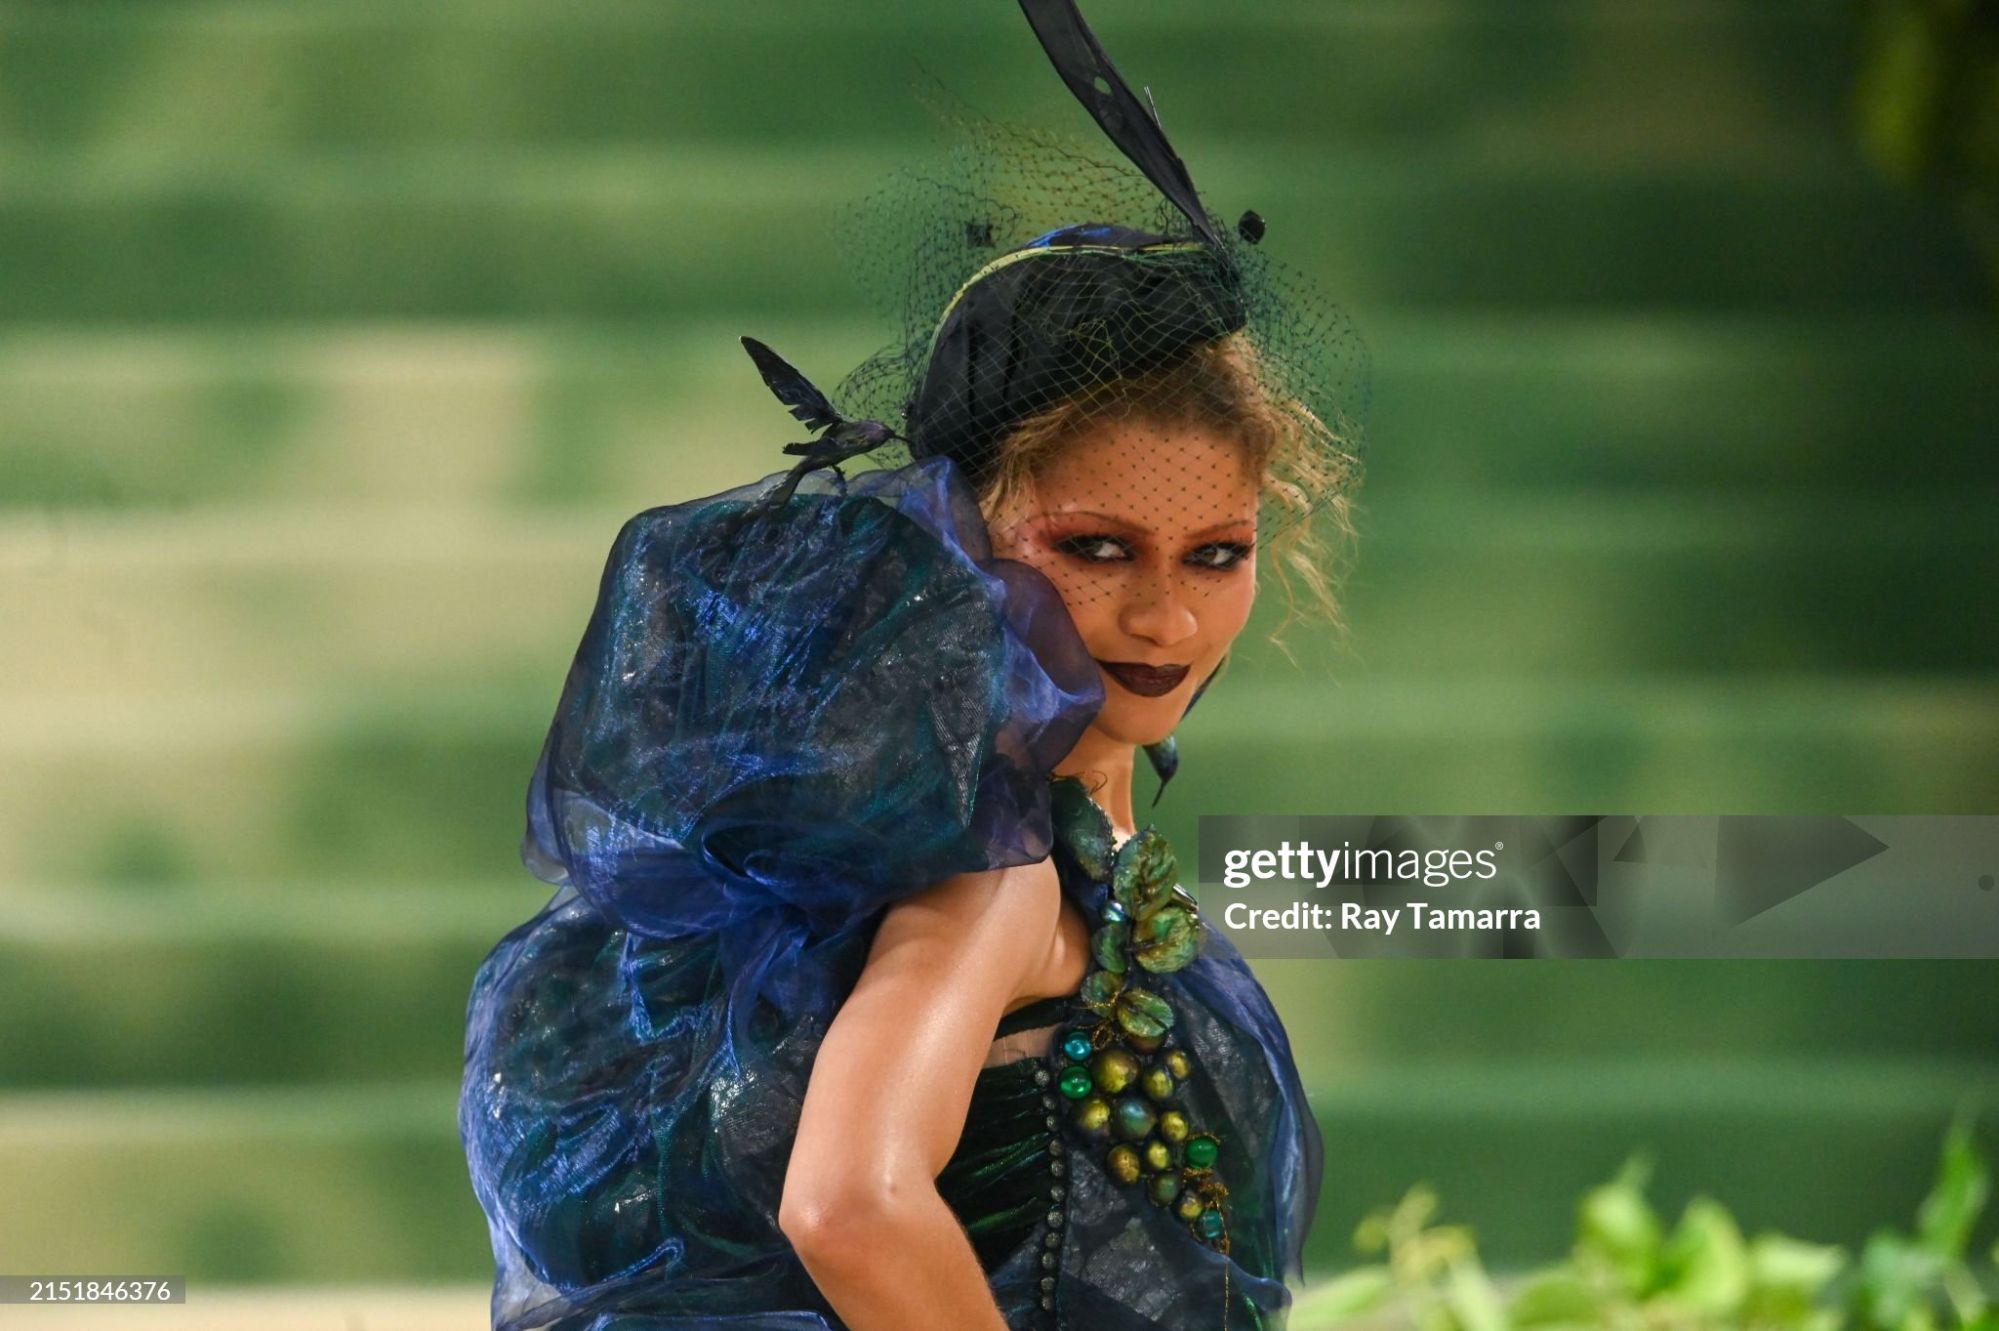 gettyimages-2151846376-2048x2048.jpg